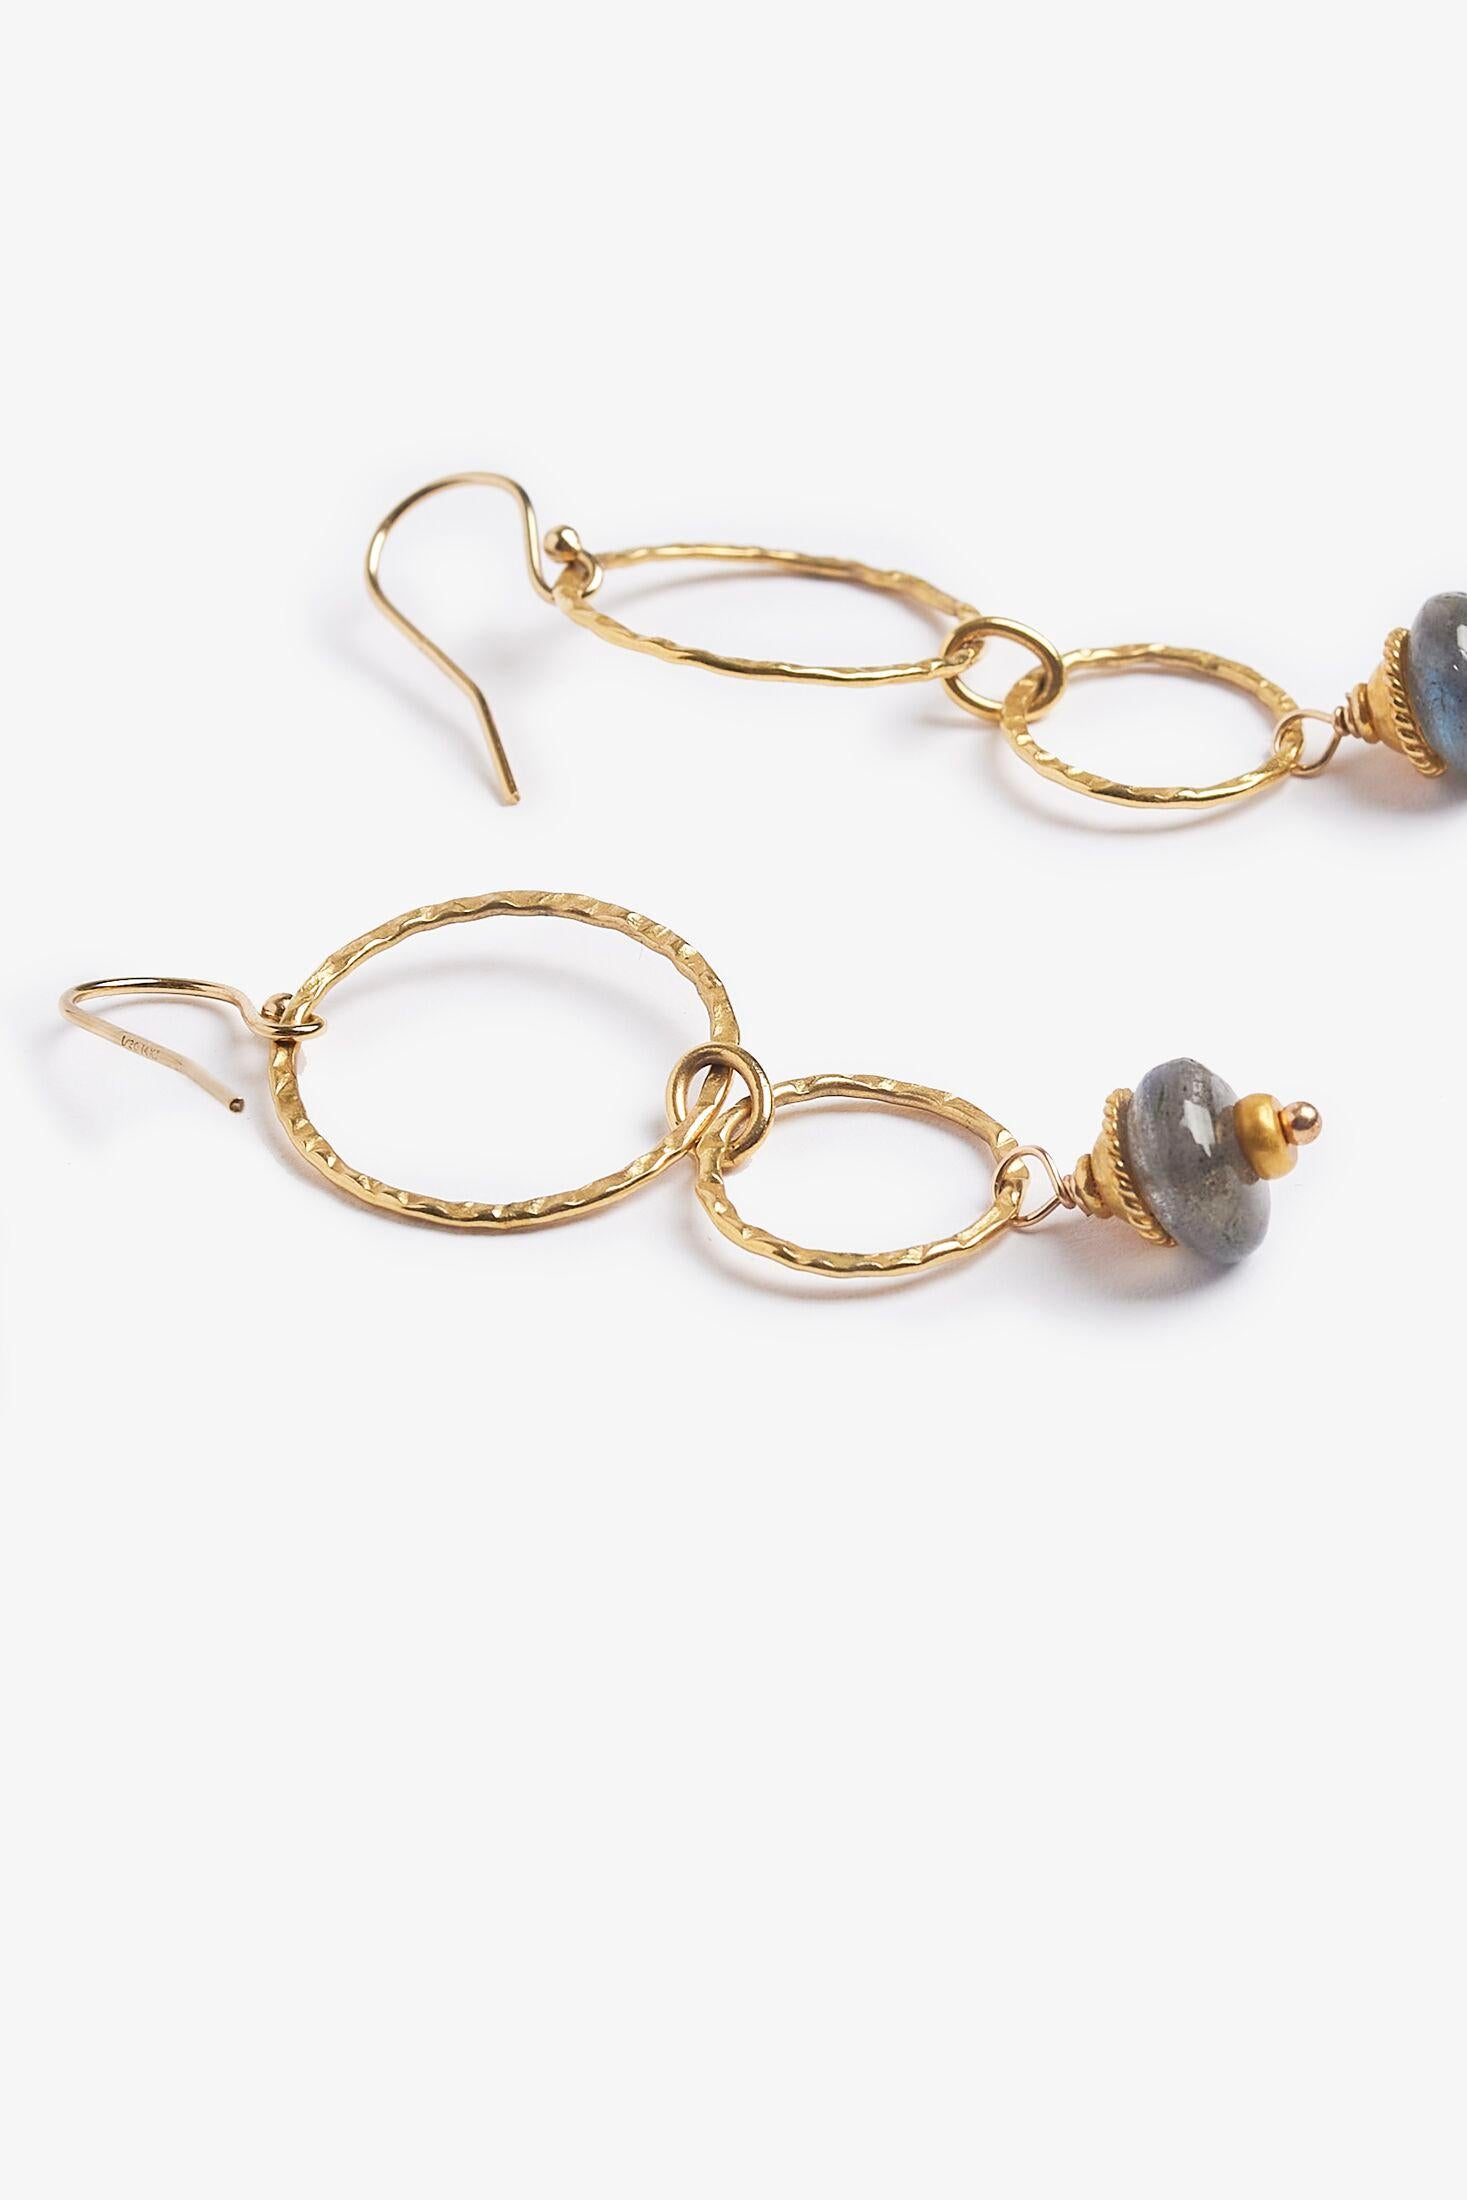 Round Cut Labradorite 14K Gold Filled Hammered Earrings